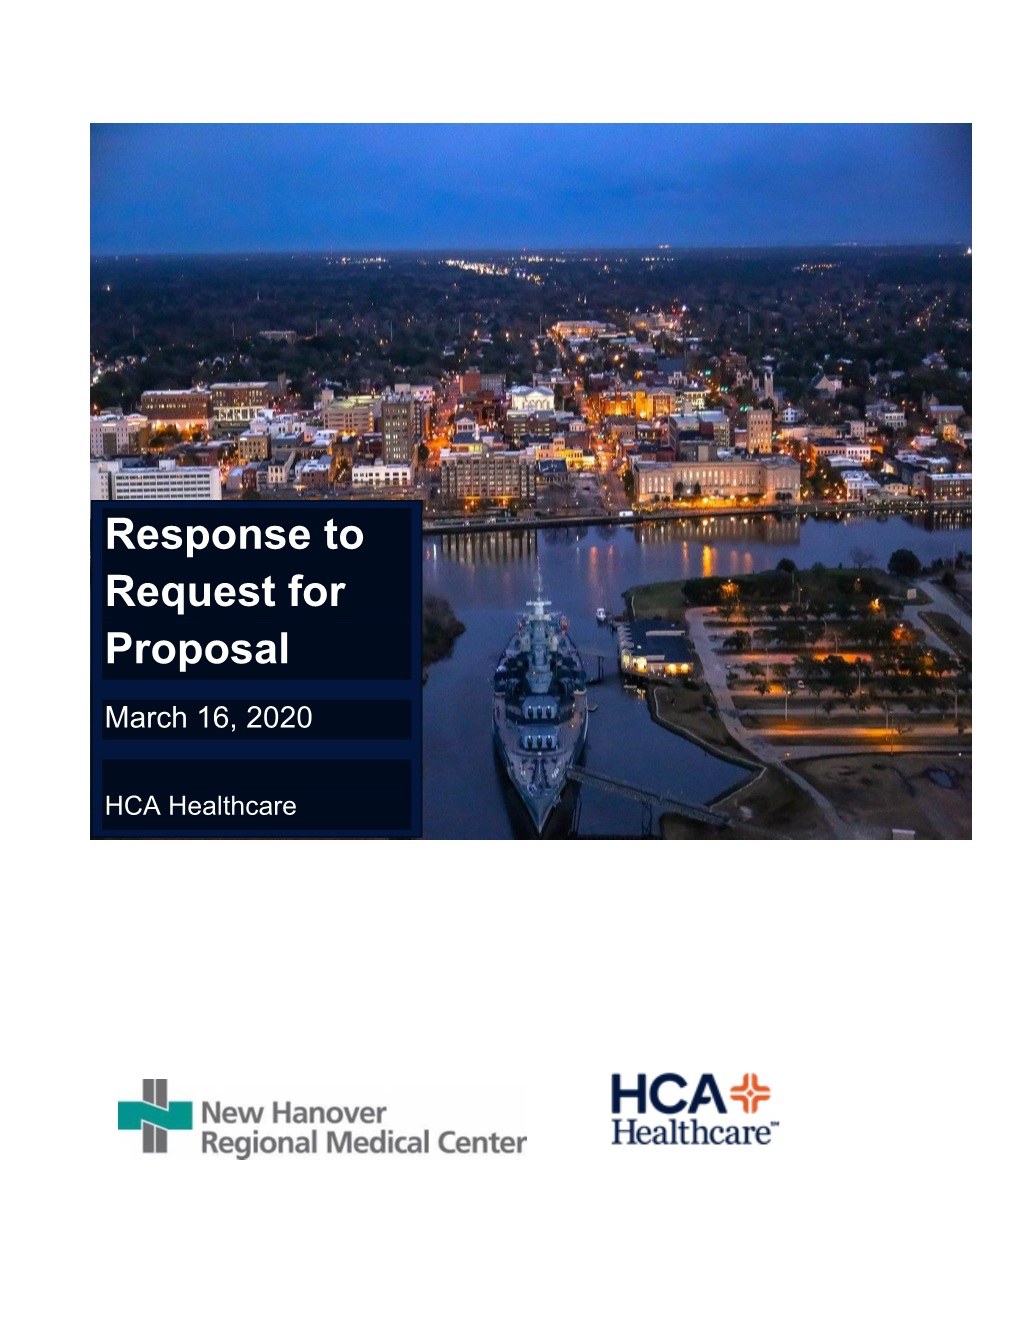 Response to Request for Proposal